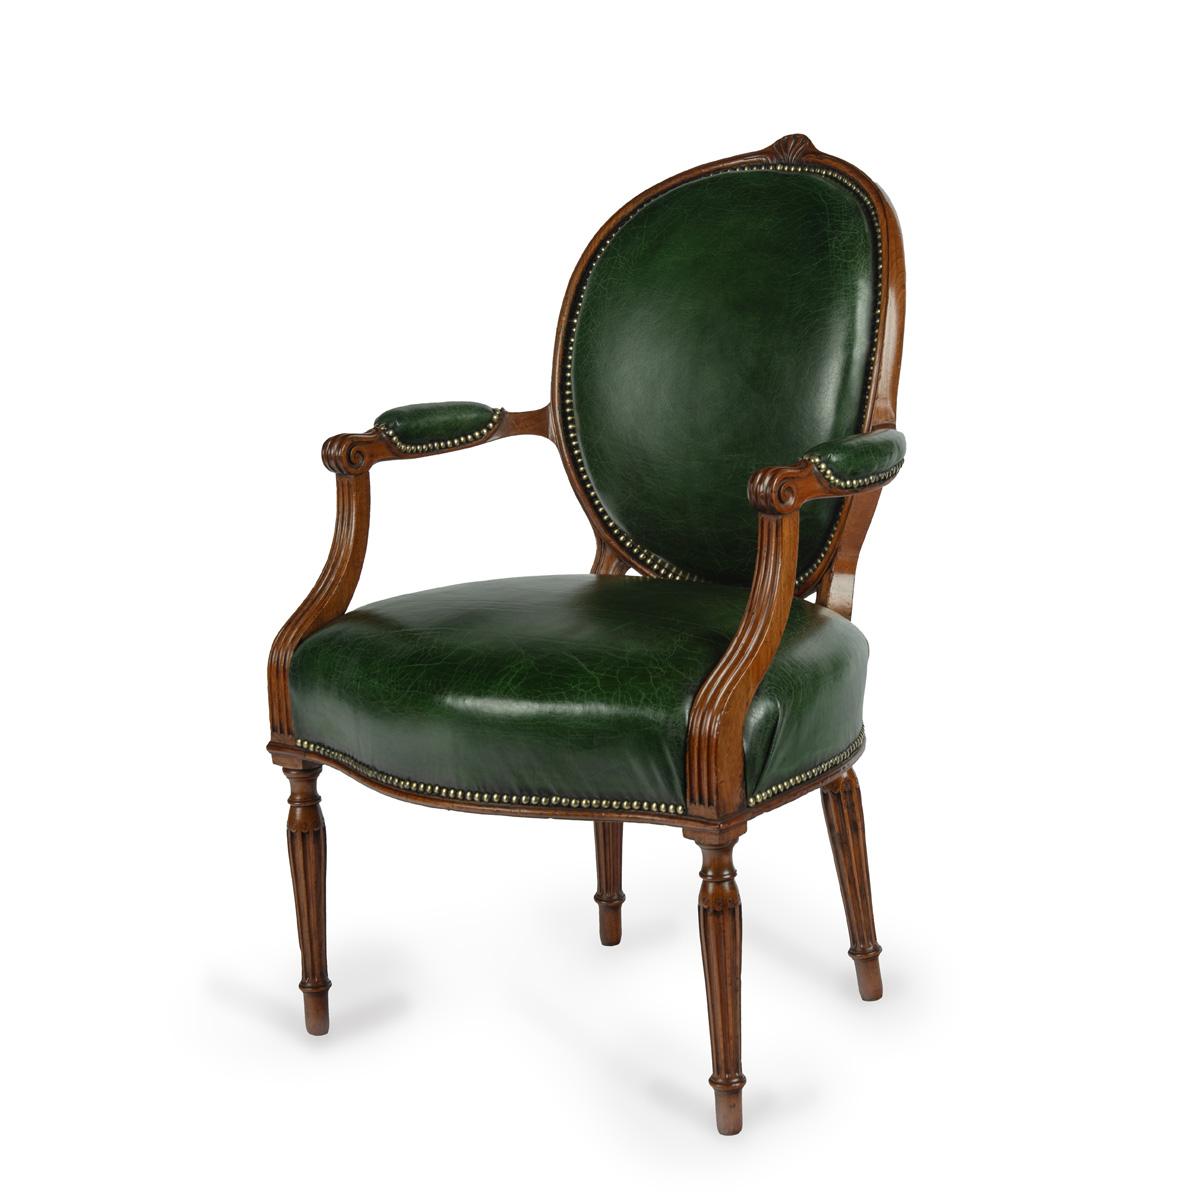 An Adam Period Armchair from the Suite made for the Duke of Newcastle at Clumber Park c.1775